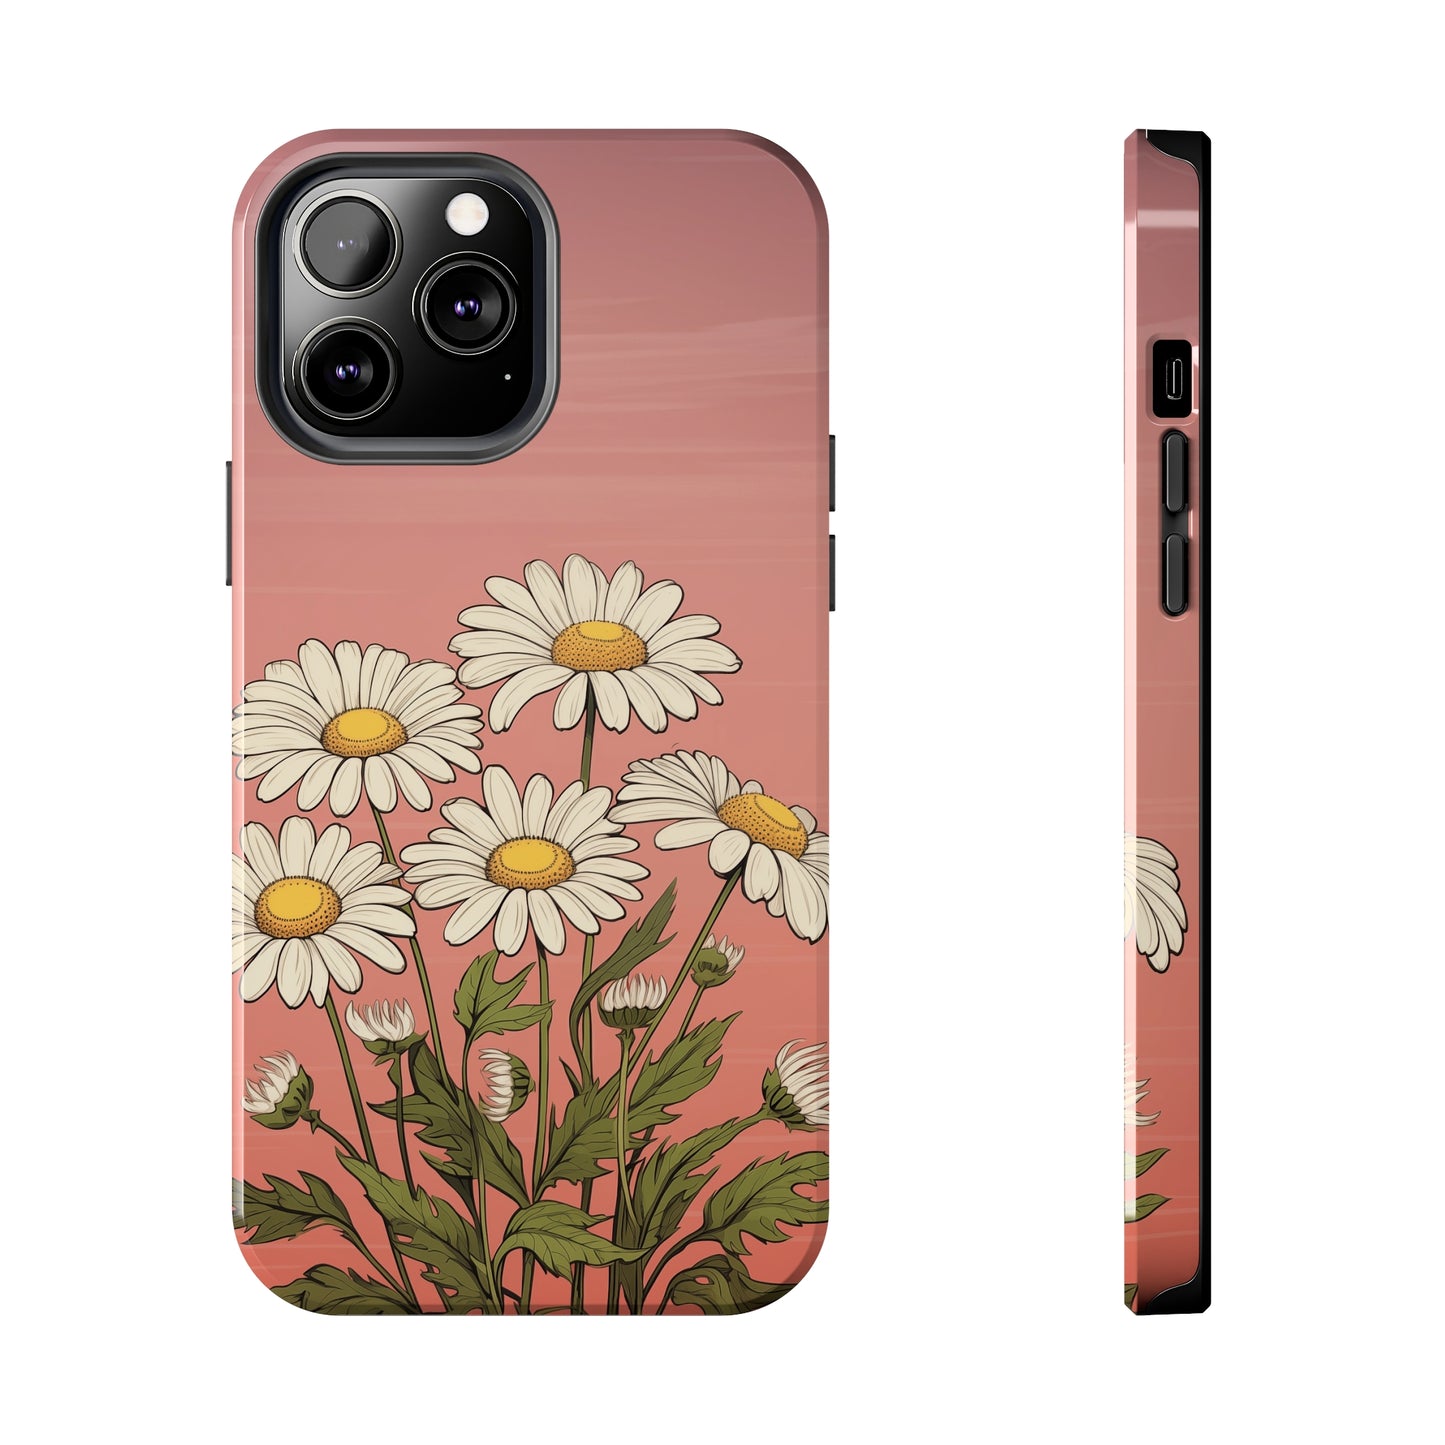 Daisies on Pink Phone Case